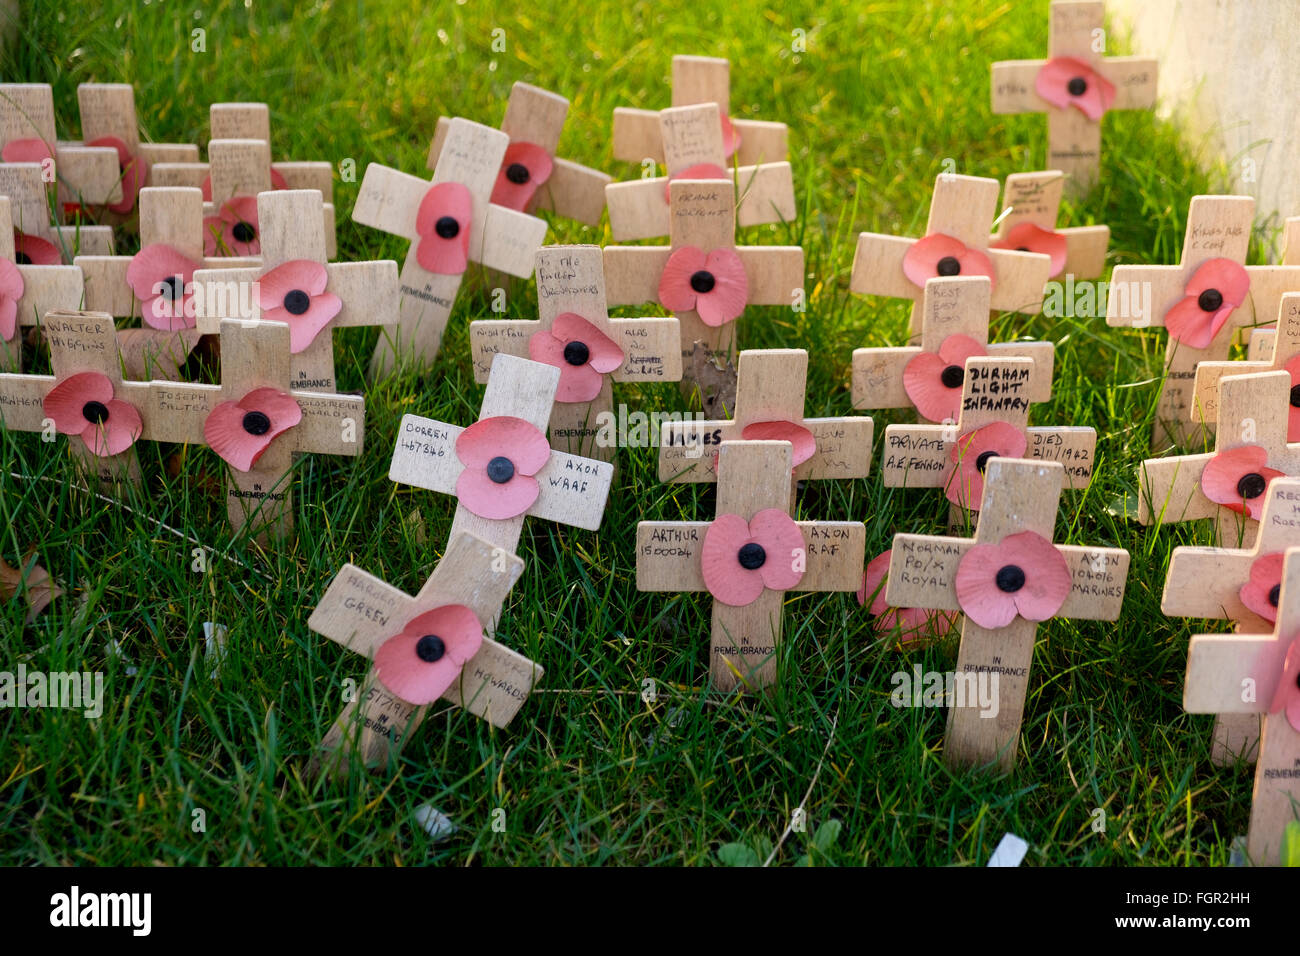 Manchester, UK - 15 February 2016: Small wooden rememberance crosses with poppies outside Manchester Town Hall Stock Photo